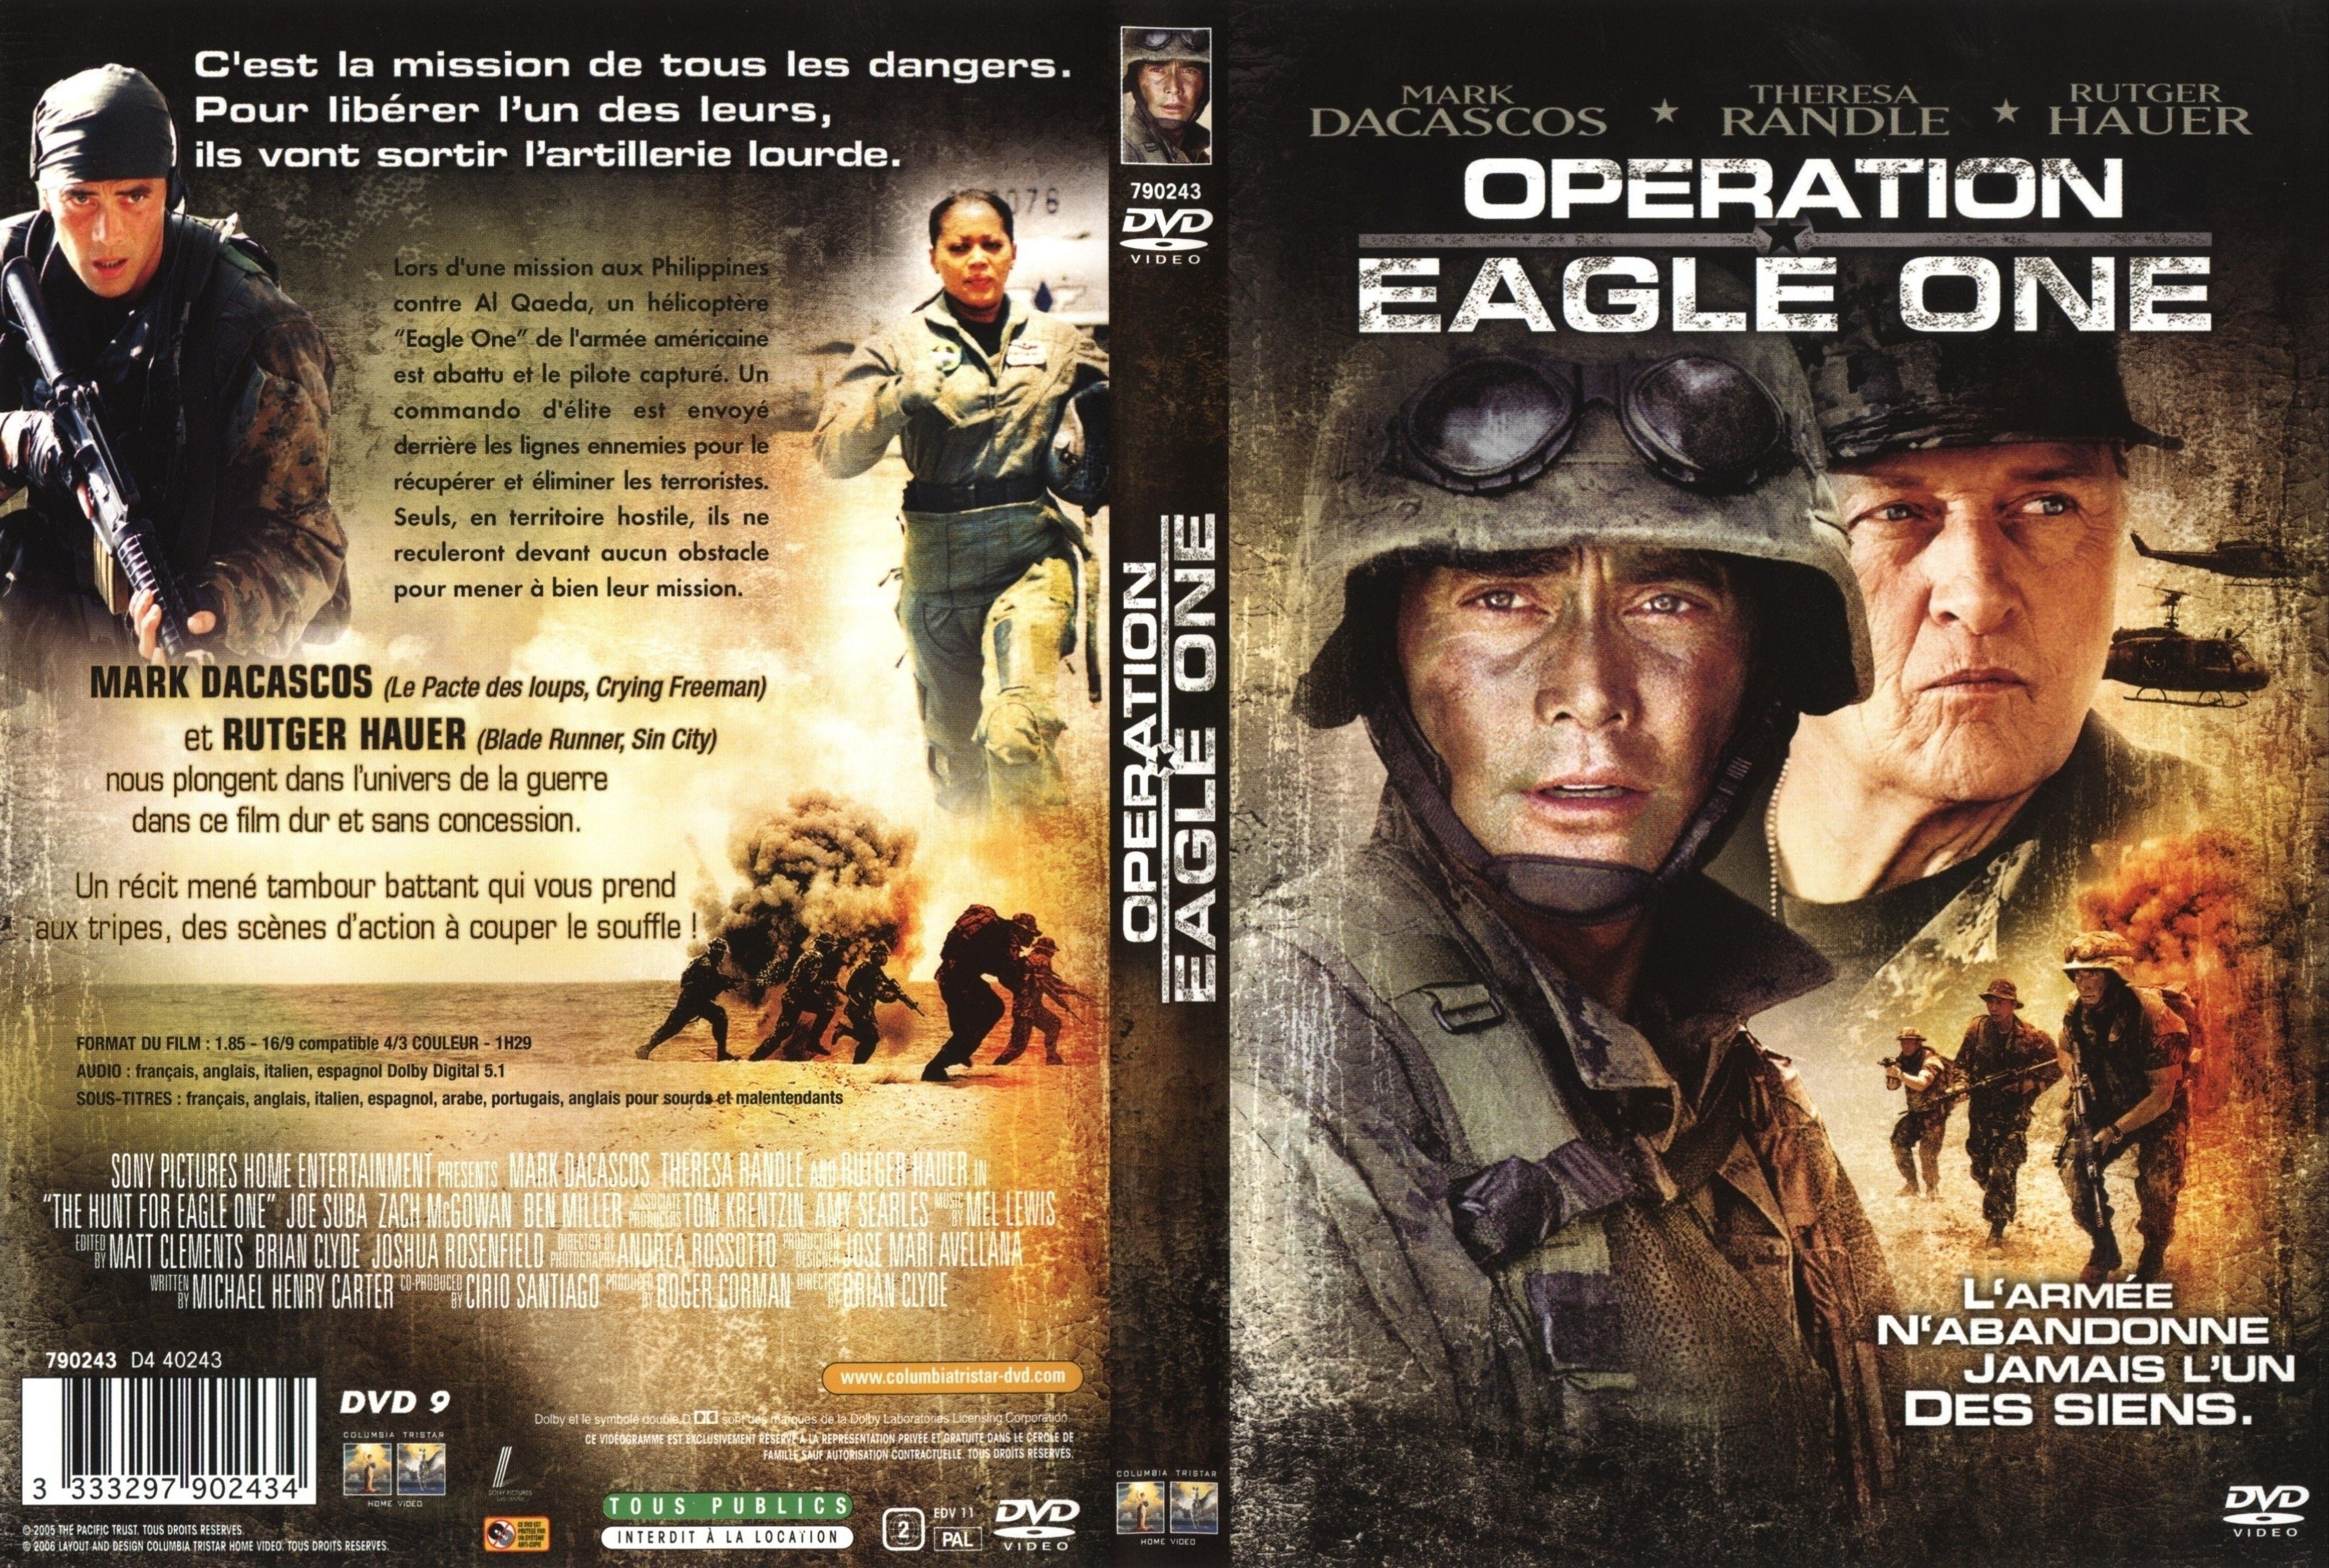 Jaquette DVD Operation eagle one